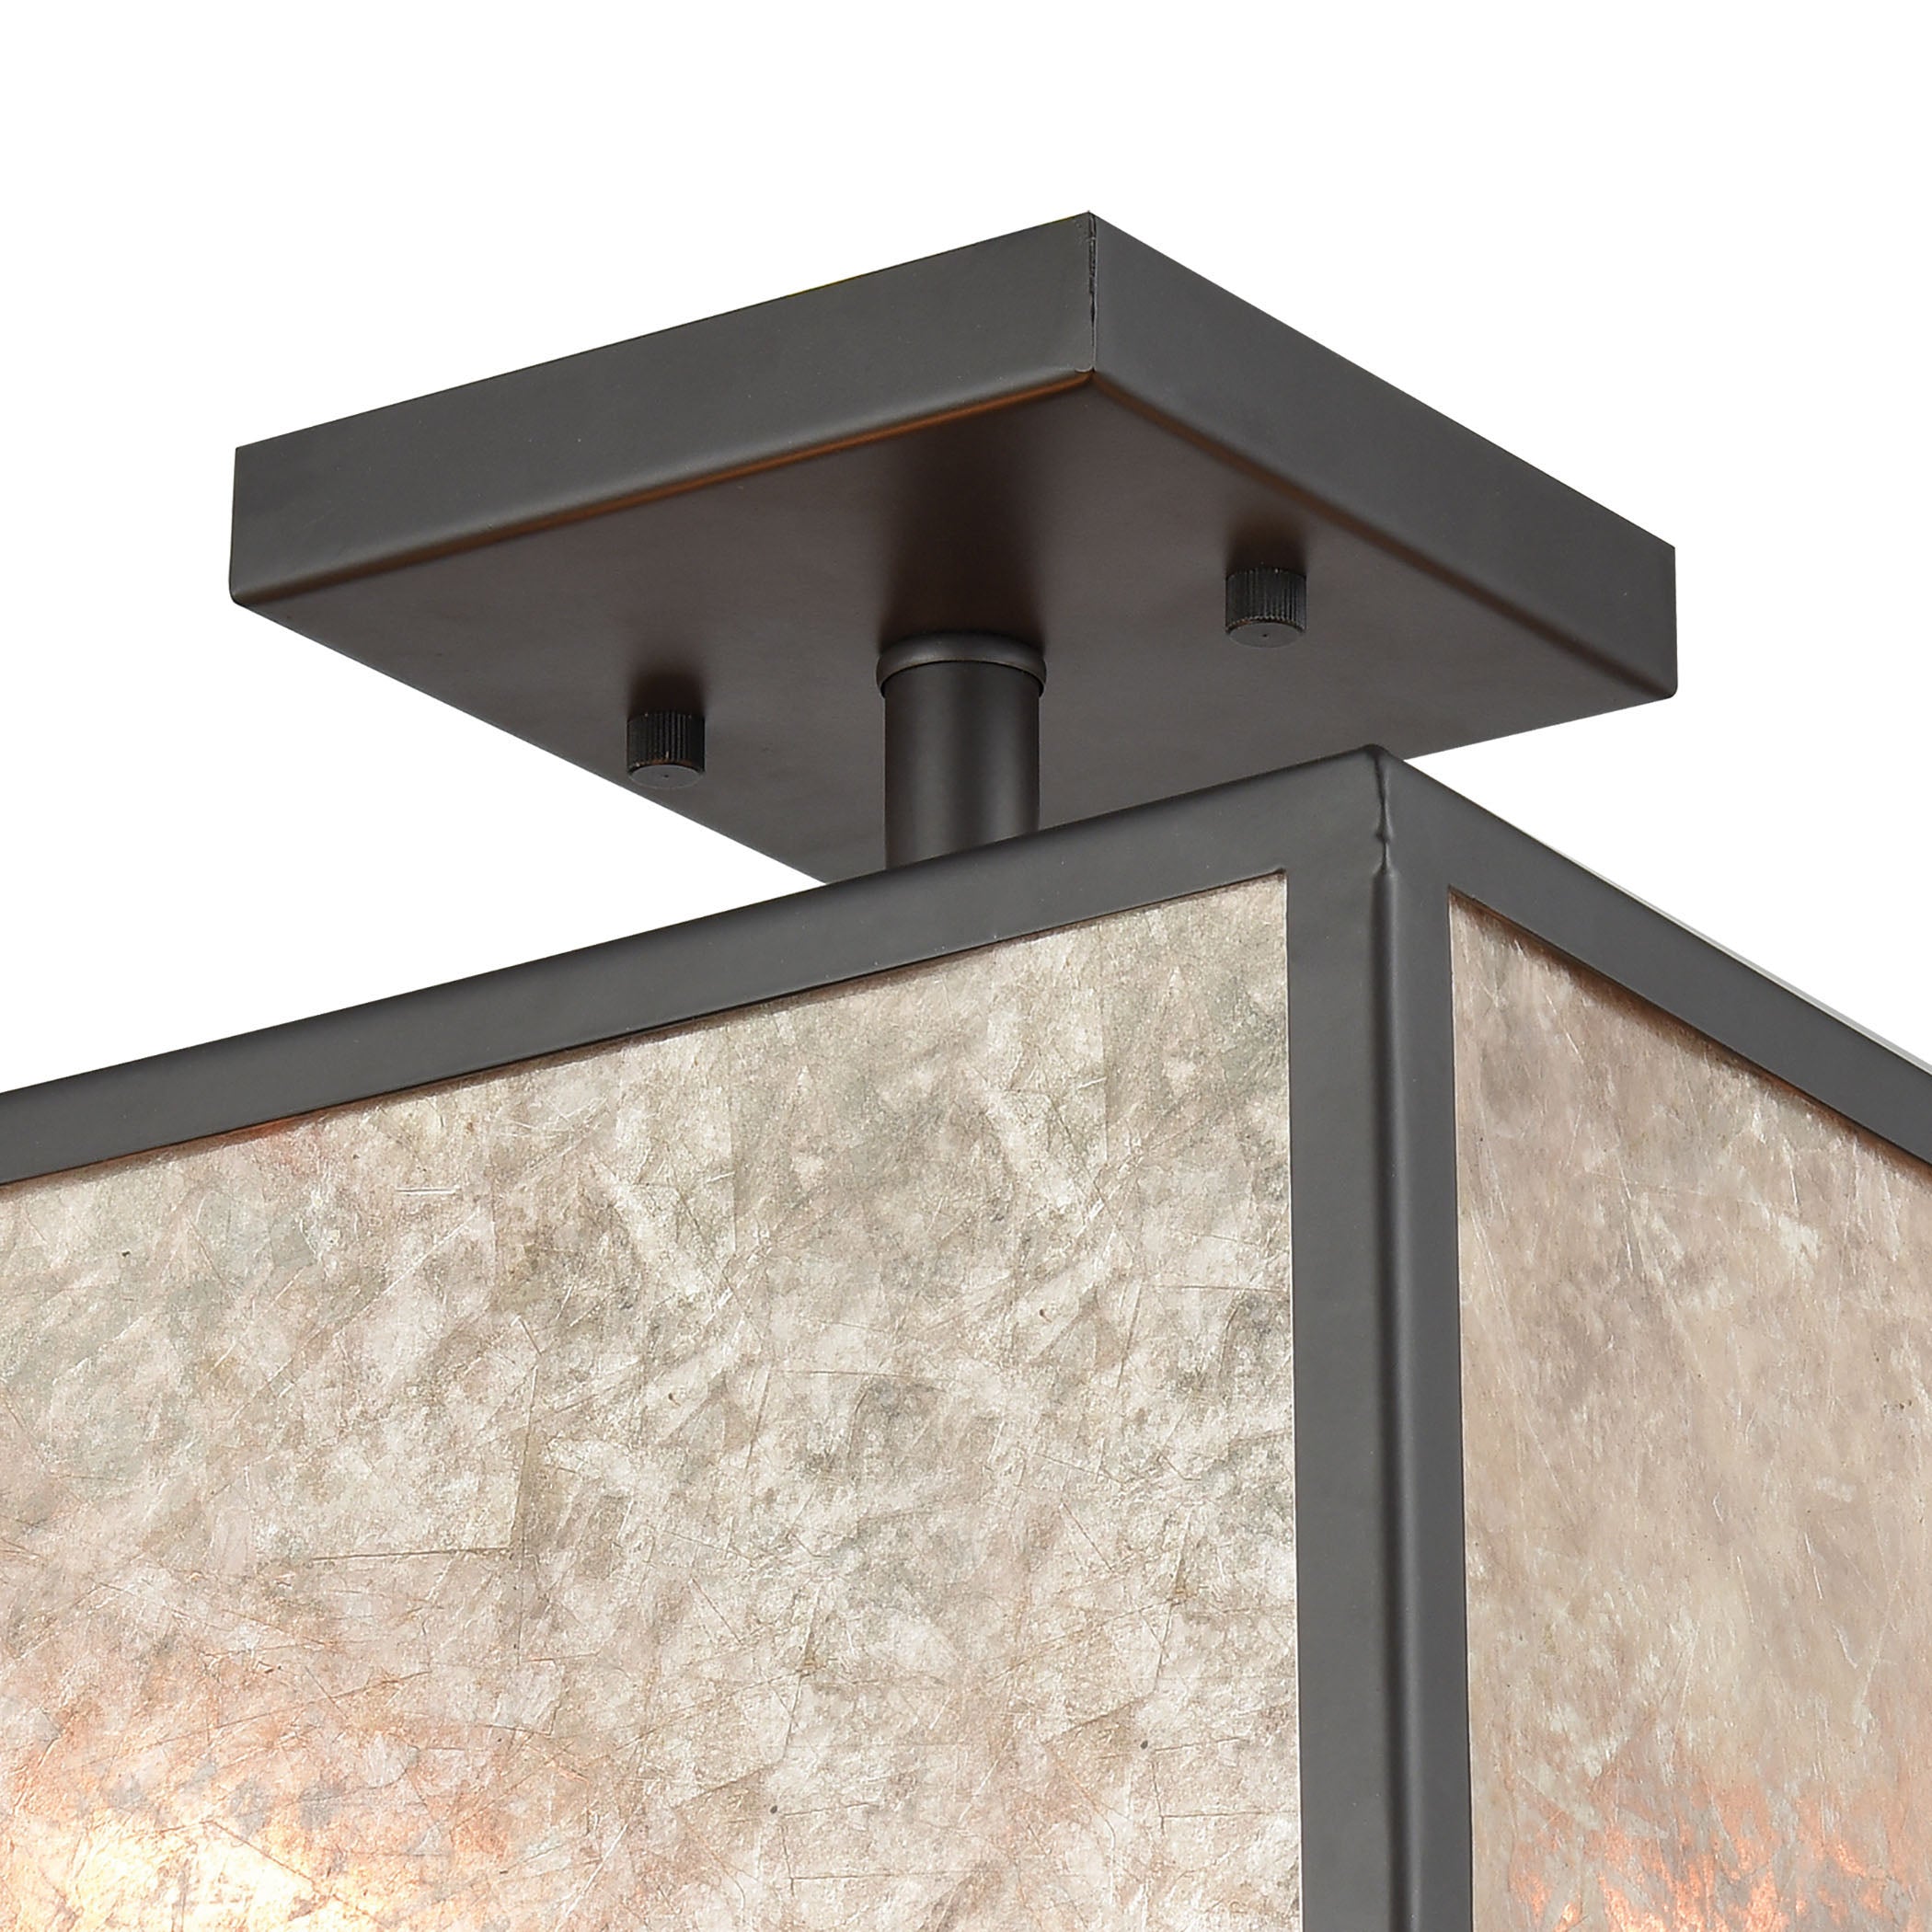 ELK Lighting 16181/2 Stasis 2-Light Semi Flush in Oil Rubbed Bronze with Tan and Clear Mica Shade